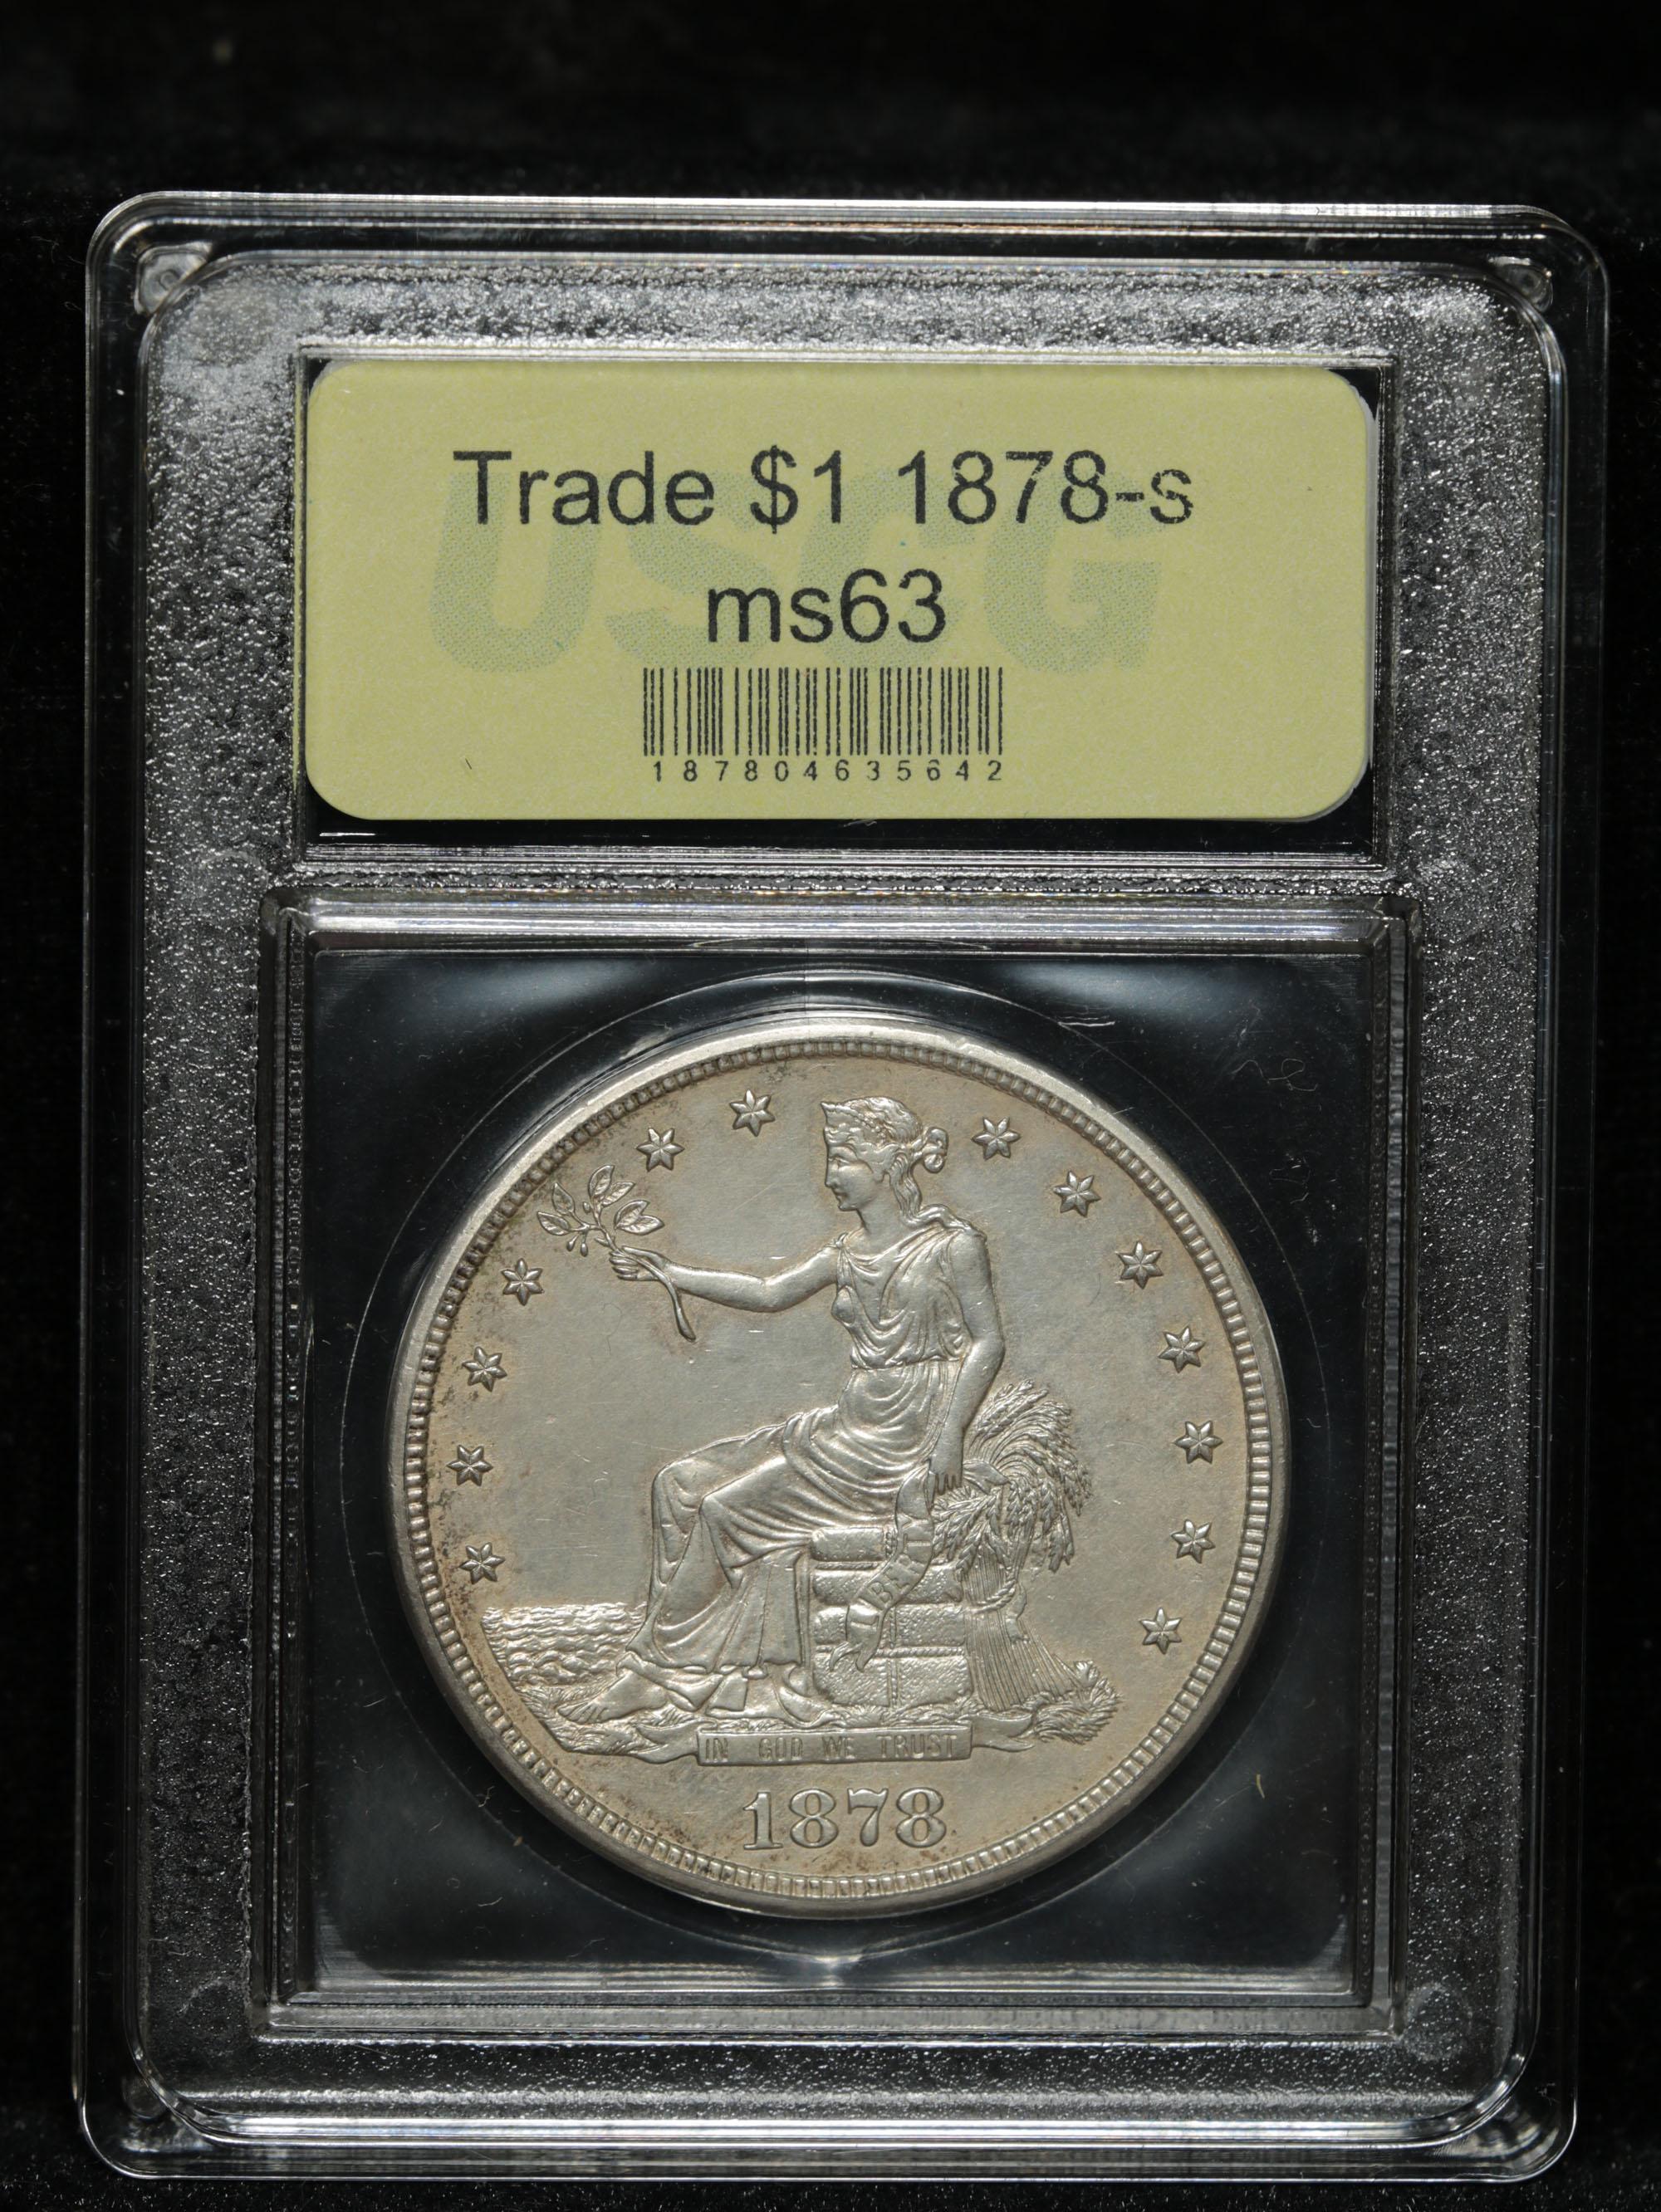 ***Auction Highlight*** 1878-s Trade Dollar $1 Graded Select Unc By USCG (fc)